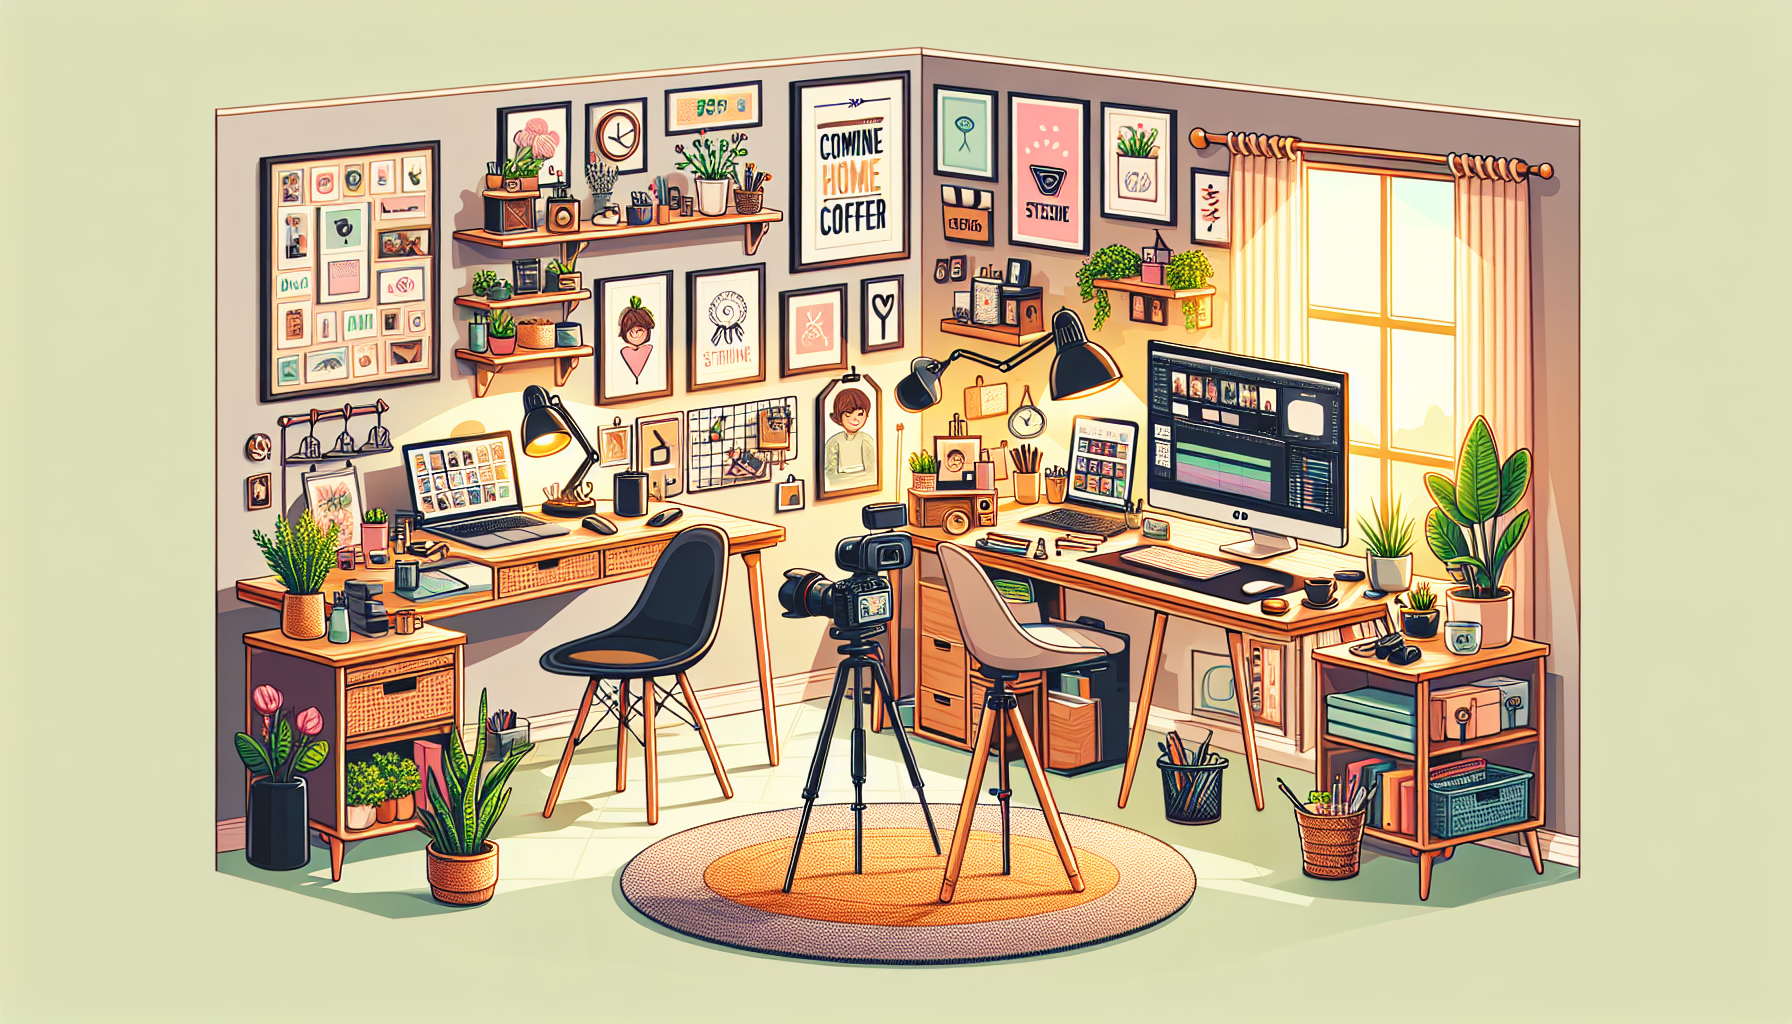 A cozy home office with a laptop on a desk, various home-based work setups like a content creator's corner with a camera and lights, a craft station with handmade products, a digital art tablet, an on